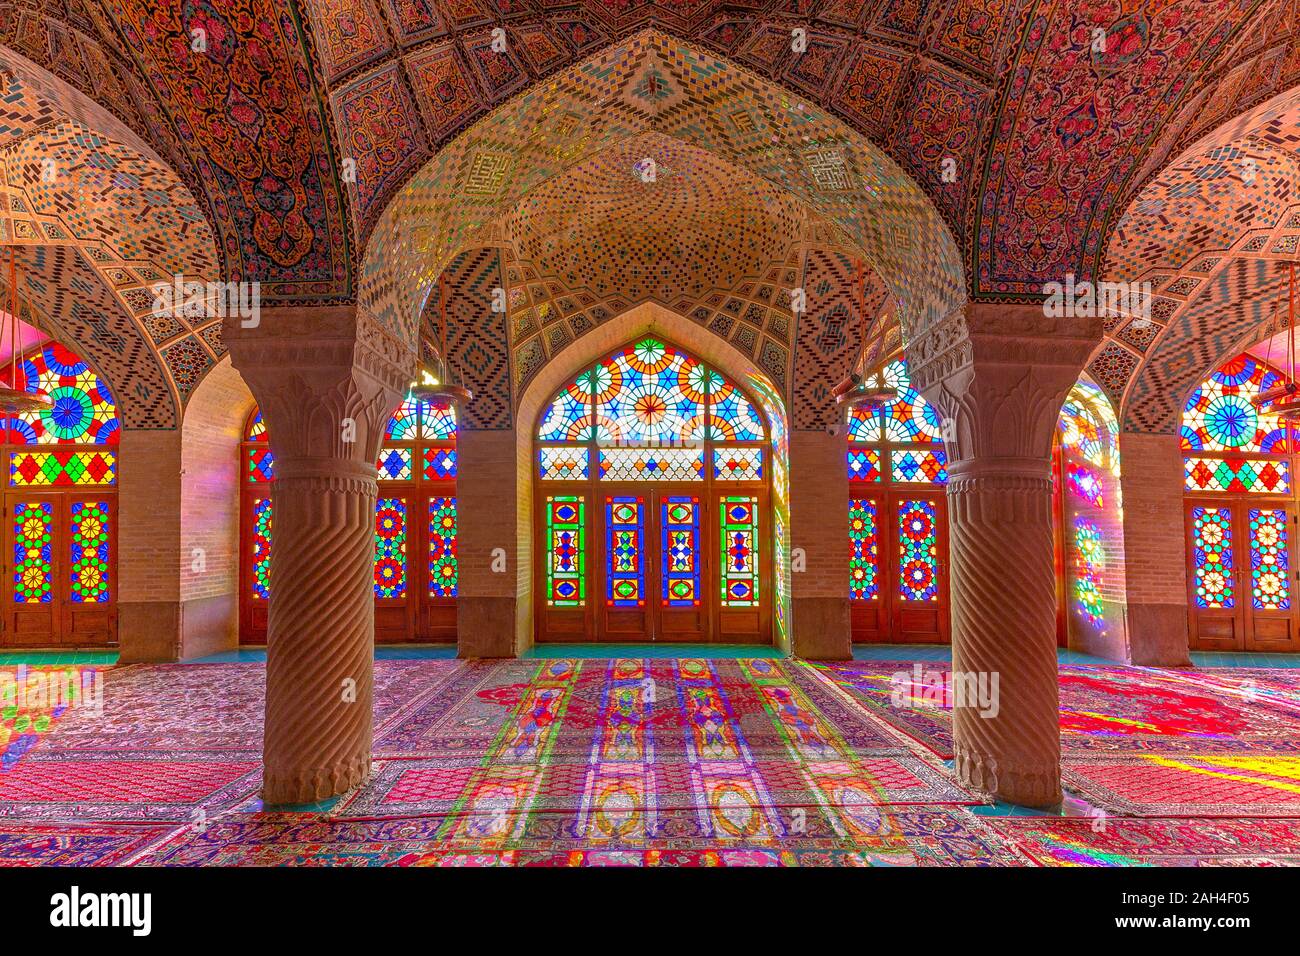 Nasir-ol-molk Mosque known also as Pink Mosque with light through its stained glass windows, in Shiraz, Iran Stock Photo